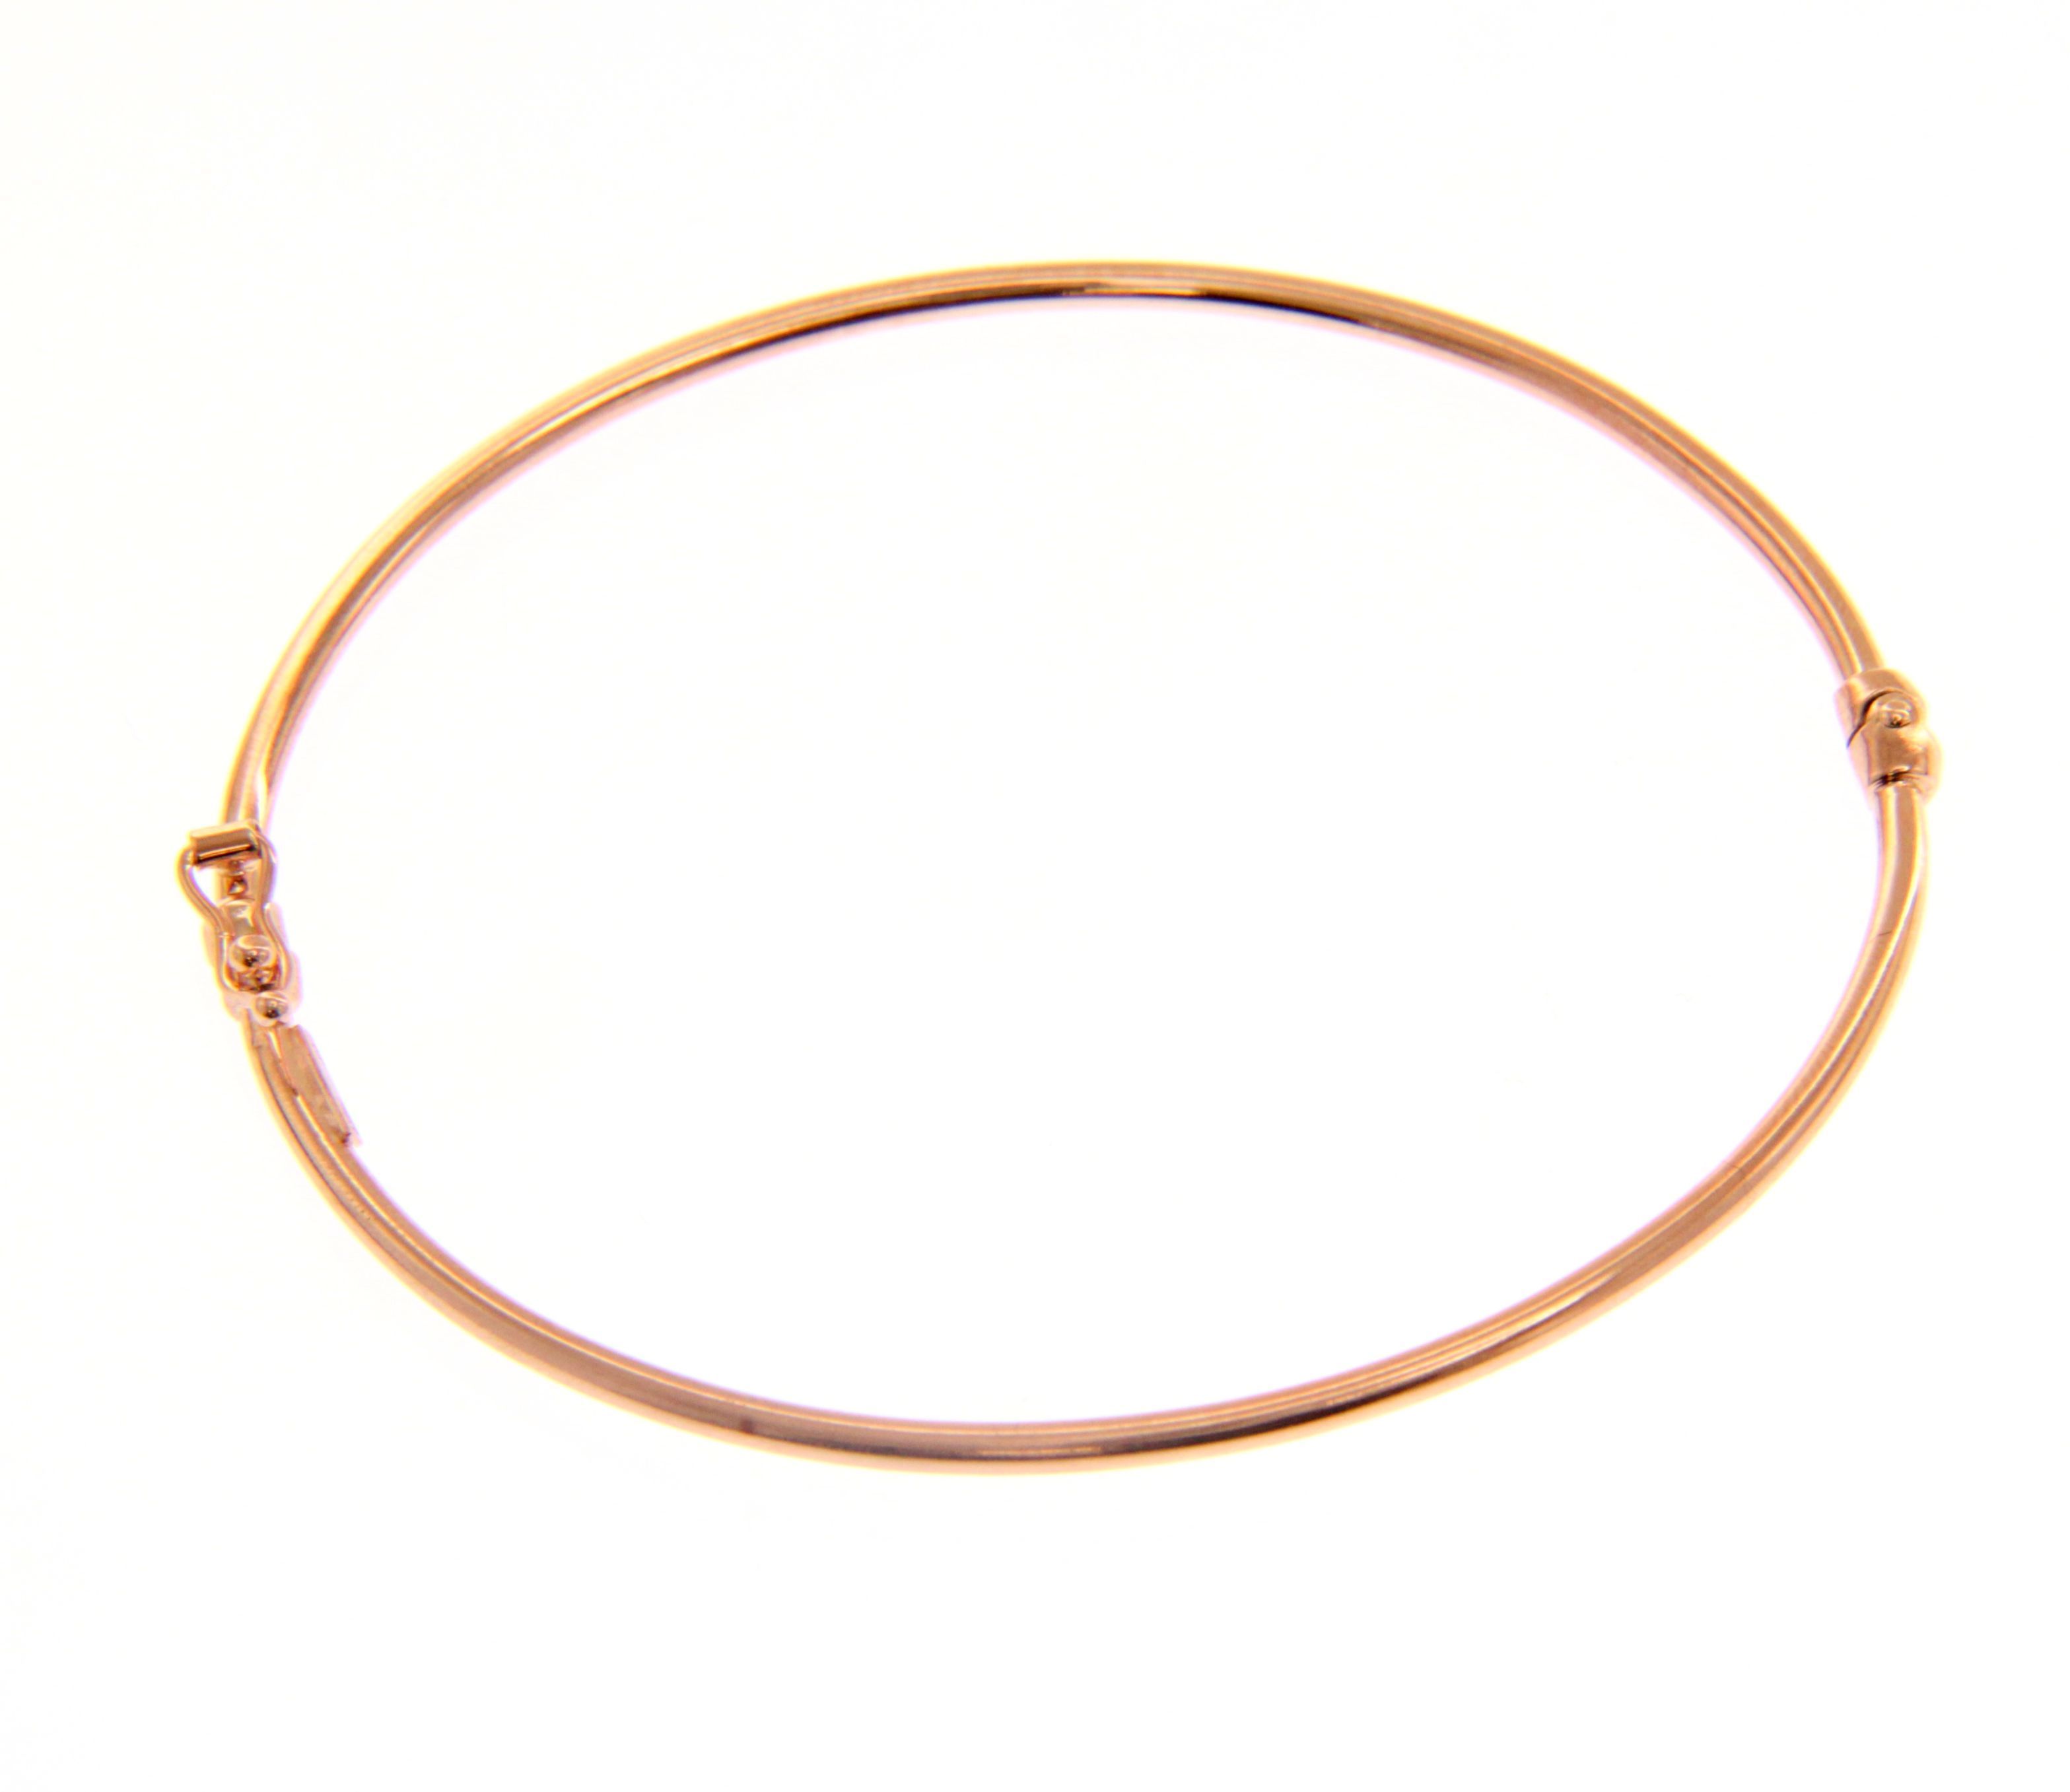 Rose gold oval bracelet with clasp k14 (code S210433)